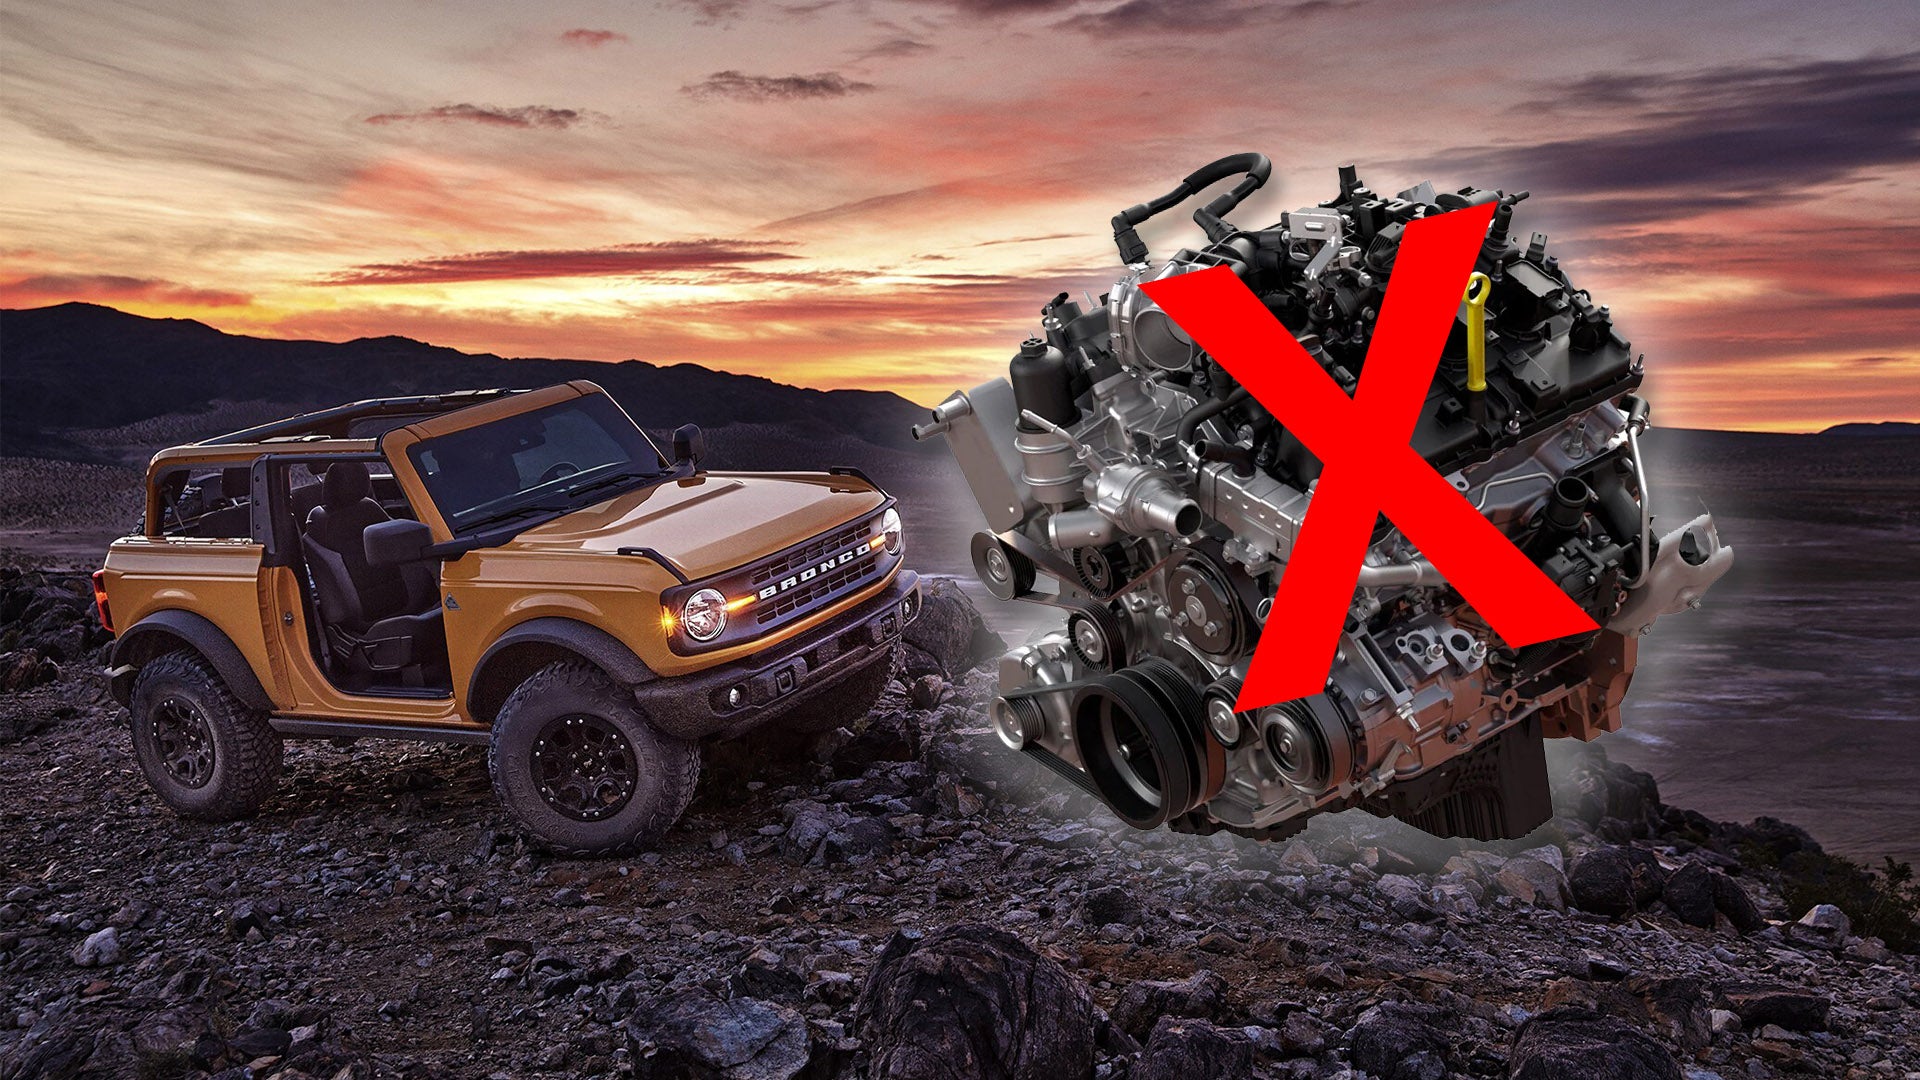 Dozens of Low-Mile 2.7L Ford Bronco Engines Have Already Failed